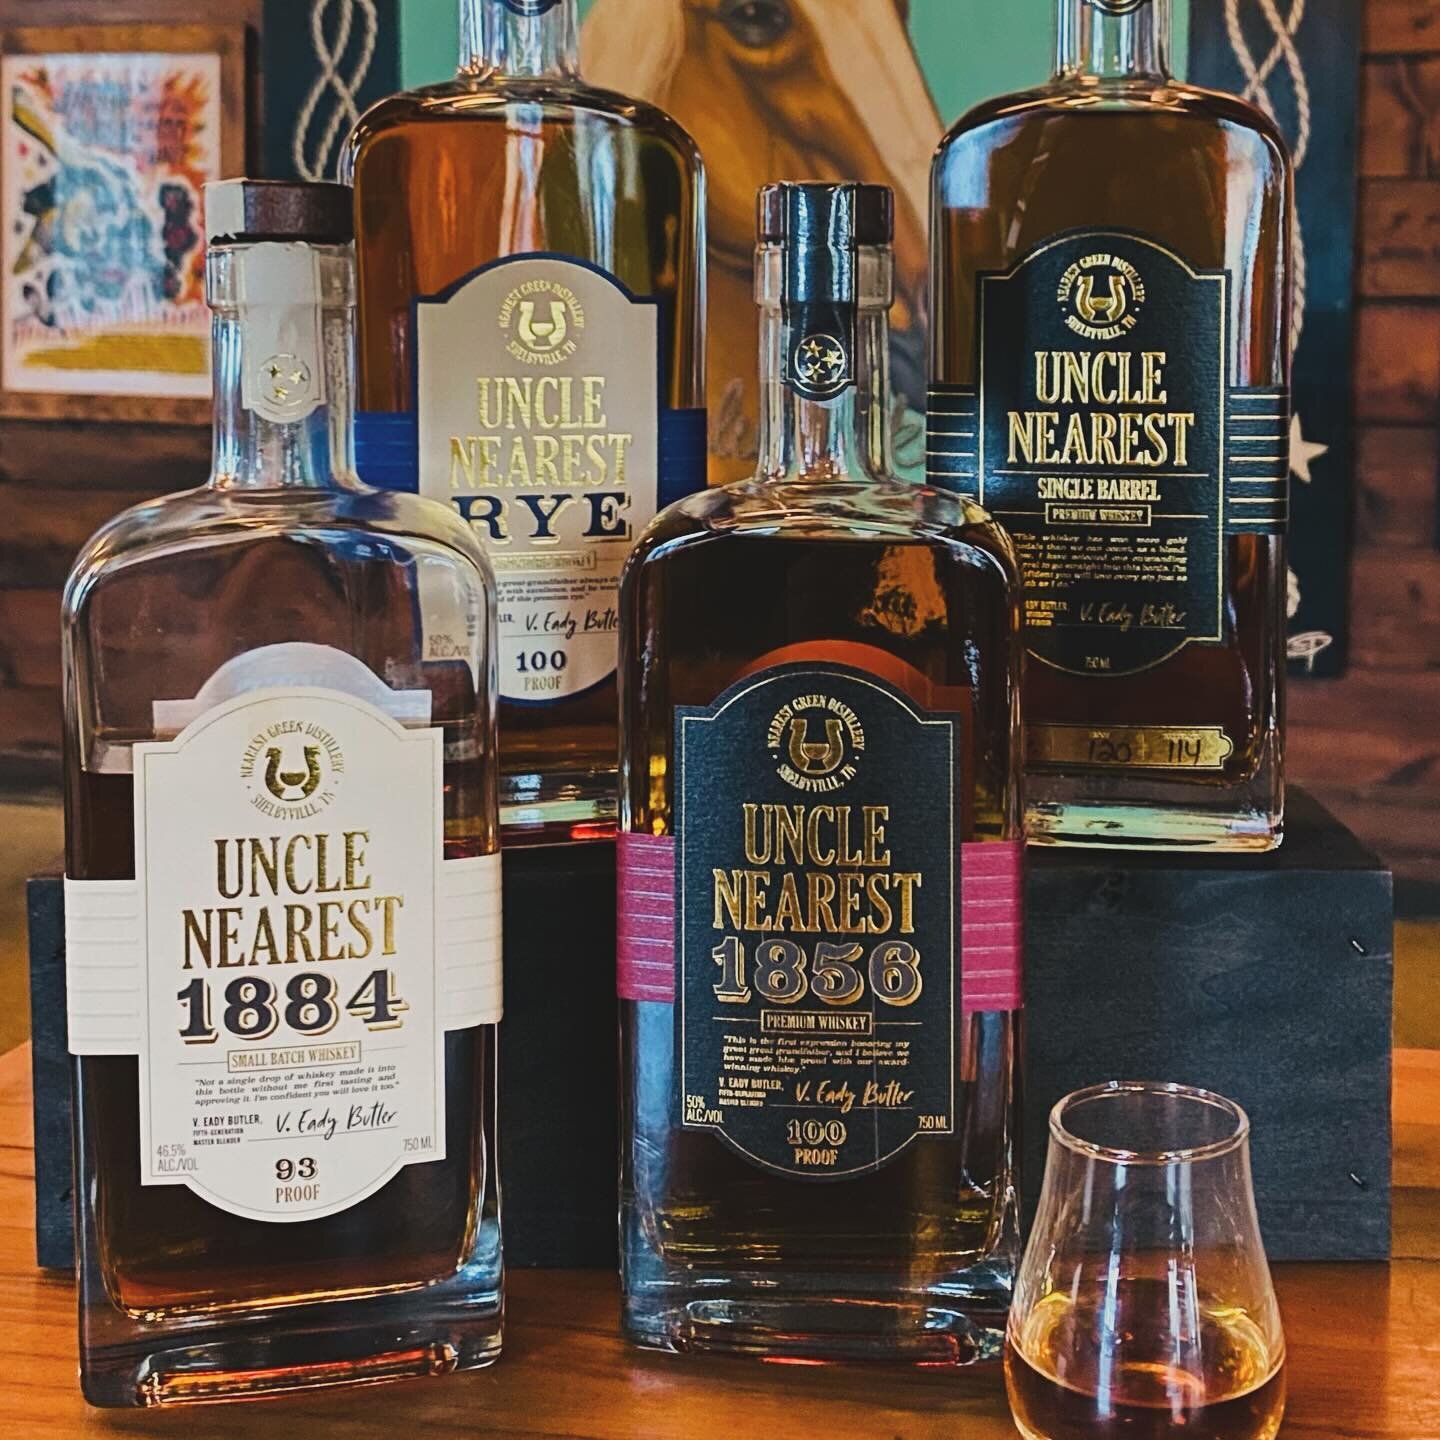 Tickets now available for our next whiskey dinner - Wednesday, February 28th - featuring one of the most excellent new whiskey brands from Tennessee @unclenearest. Join us to learn about and taste this Black-owned and woman-led distillery&rsquo;s awa